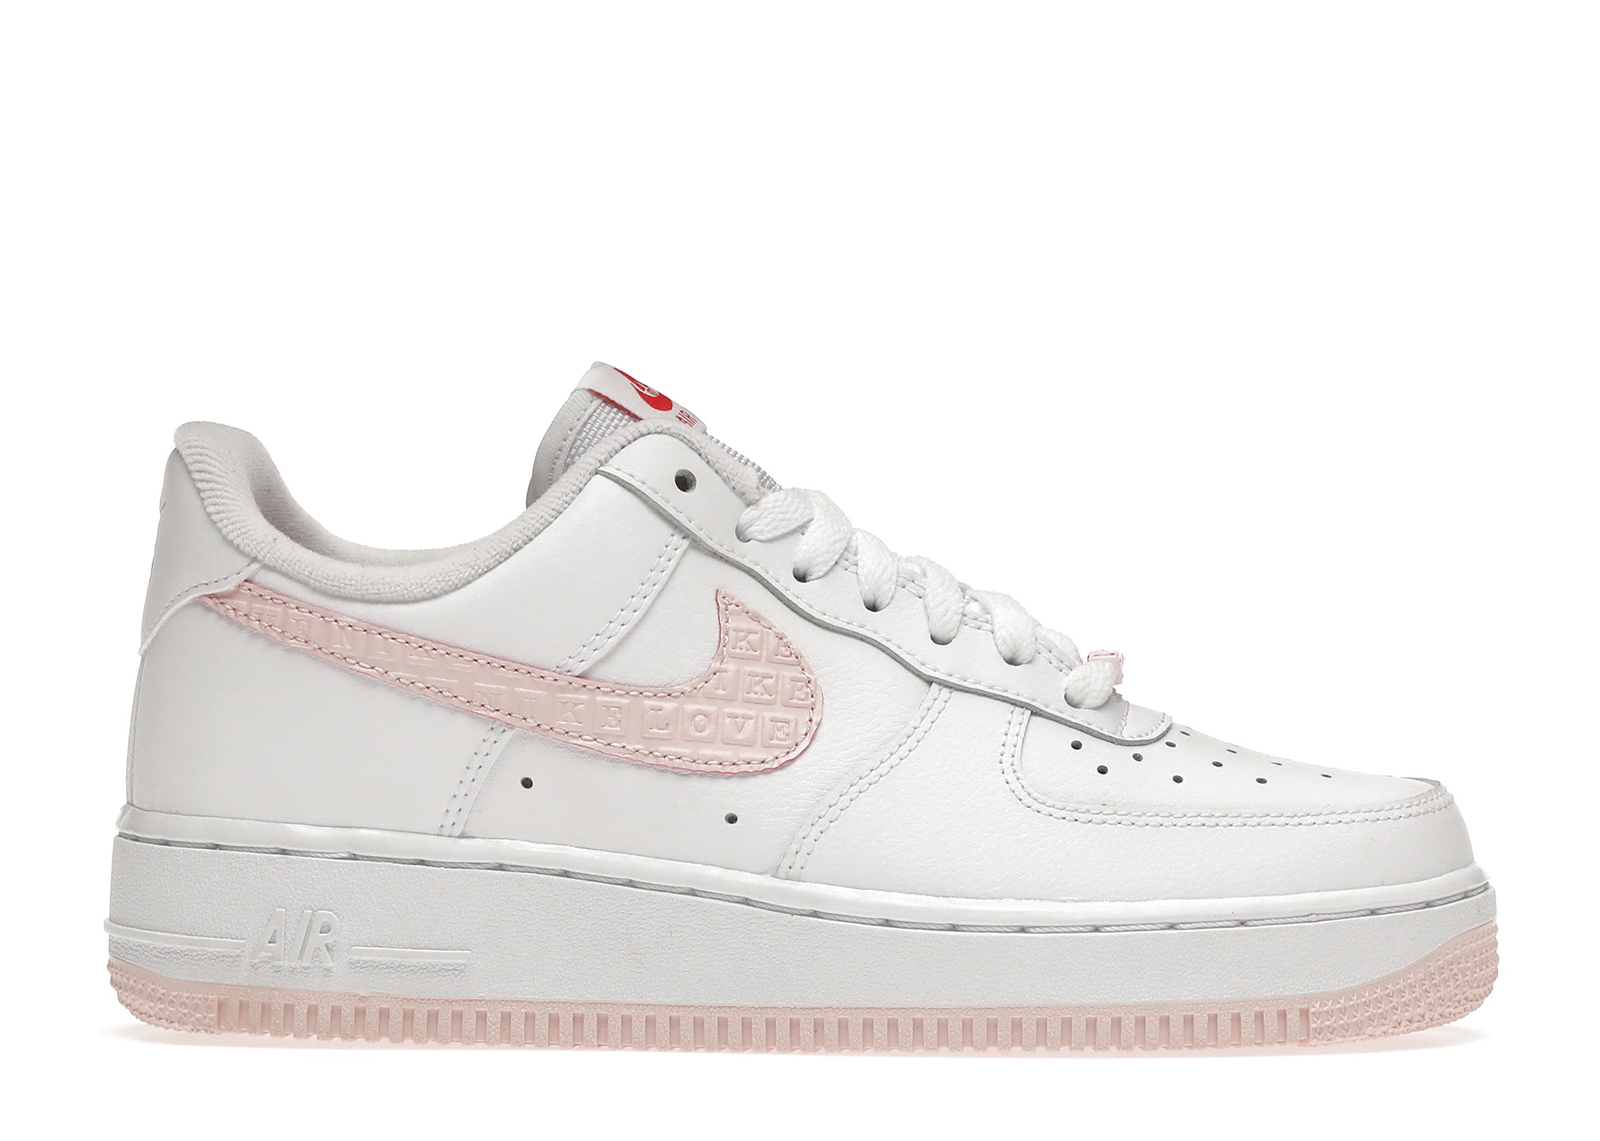 nike air force 1 valentine's day 2022